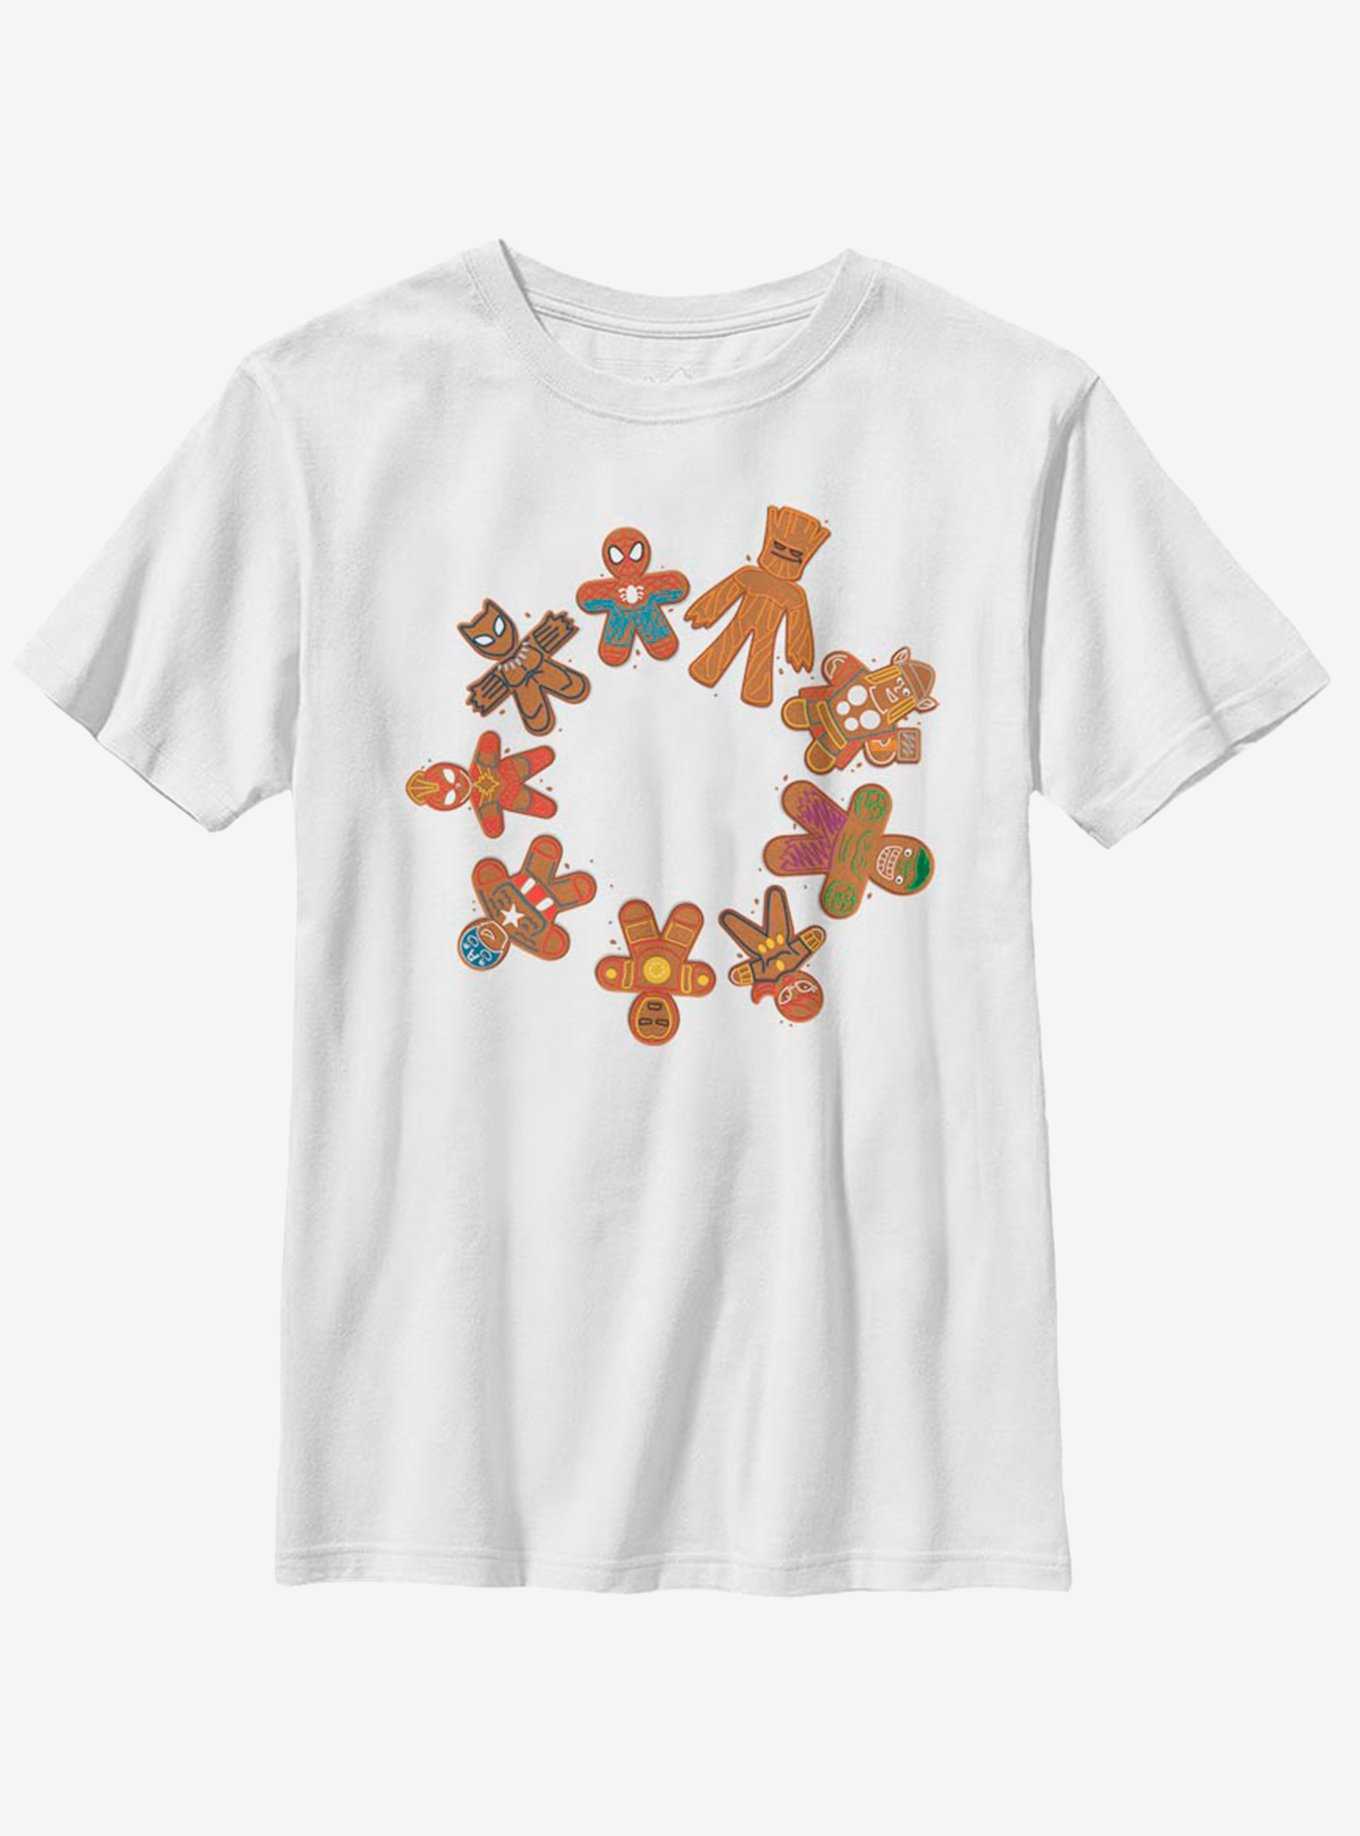 Marvel Avengers Cookie Circle Youth T-Shirt, , hi-res